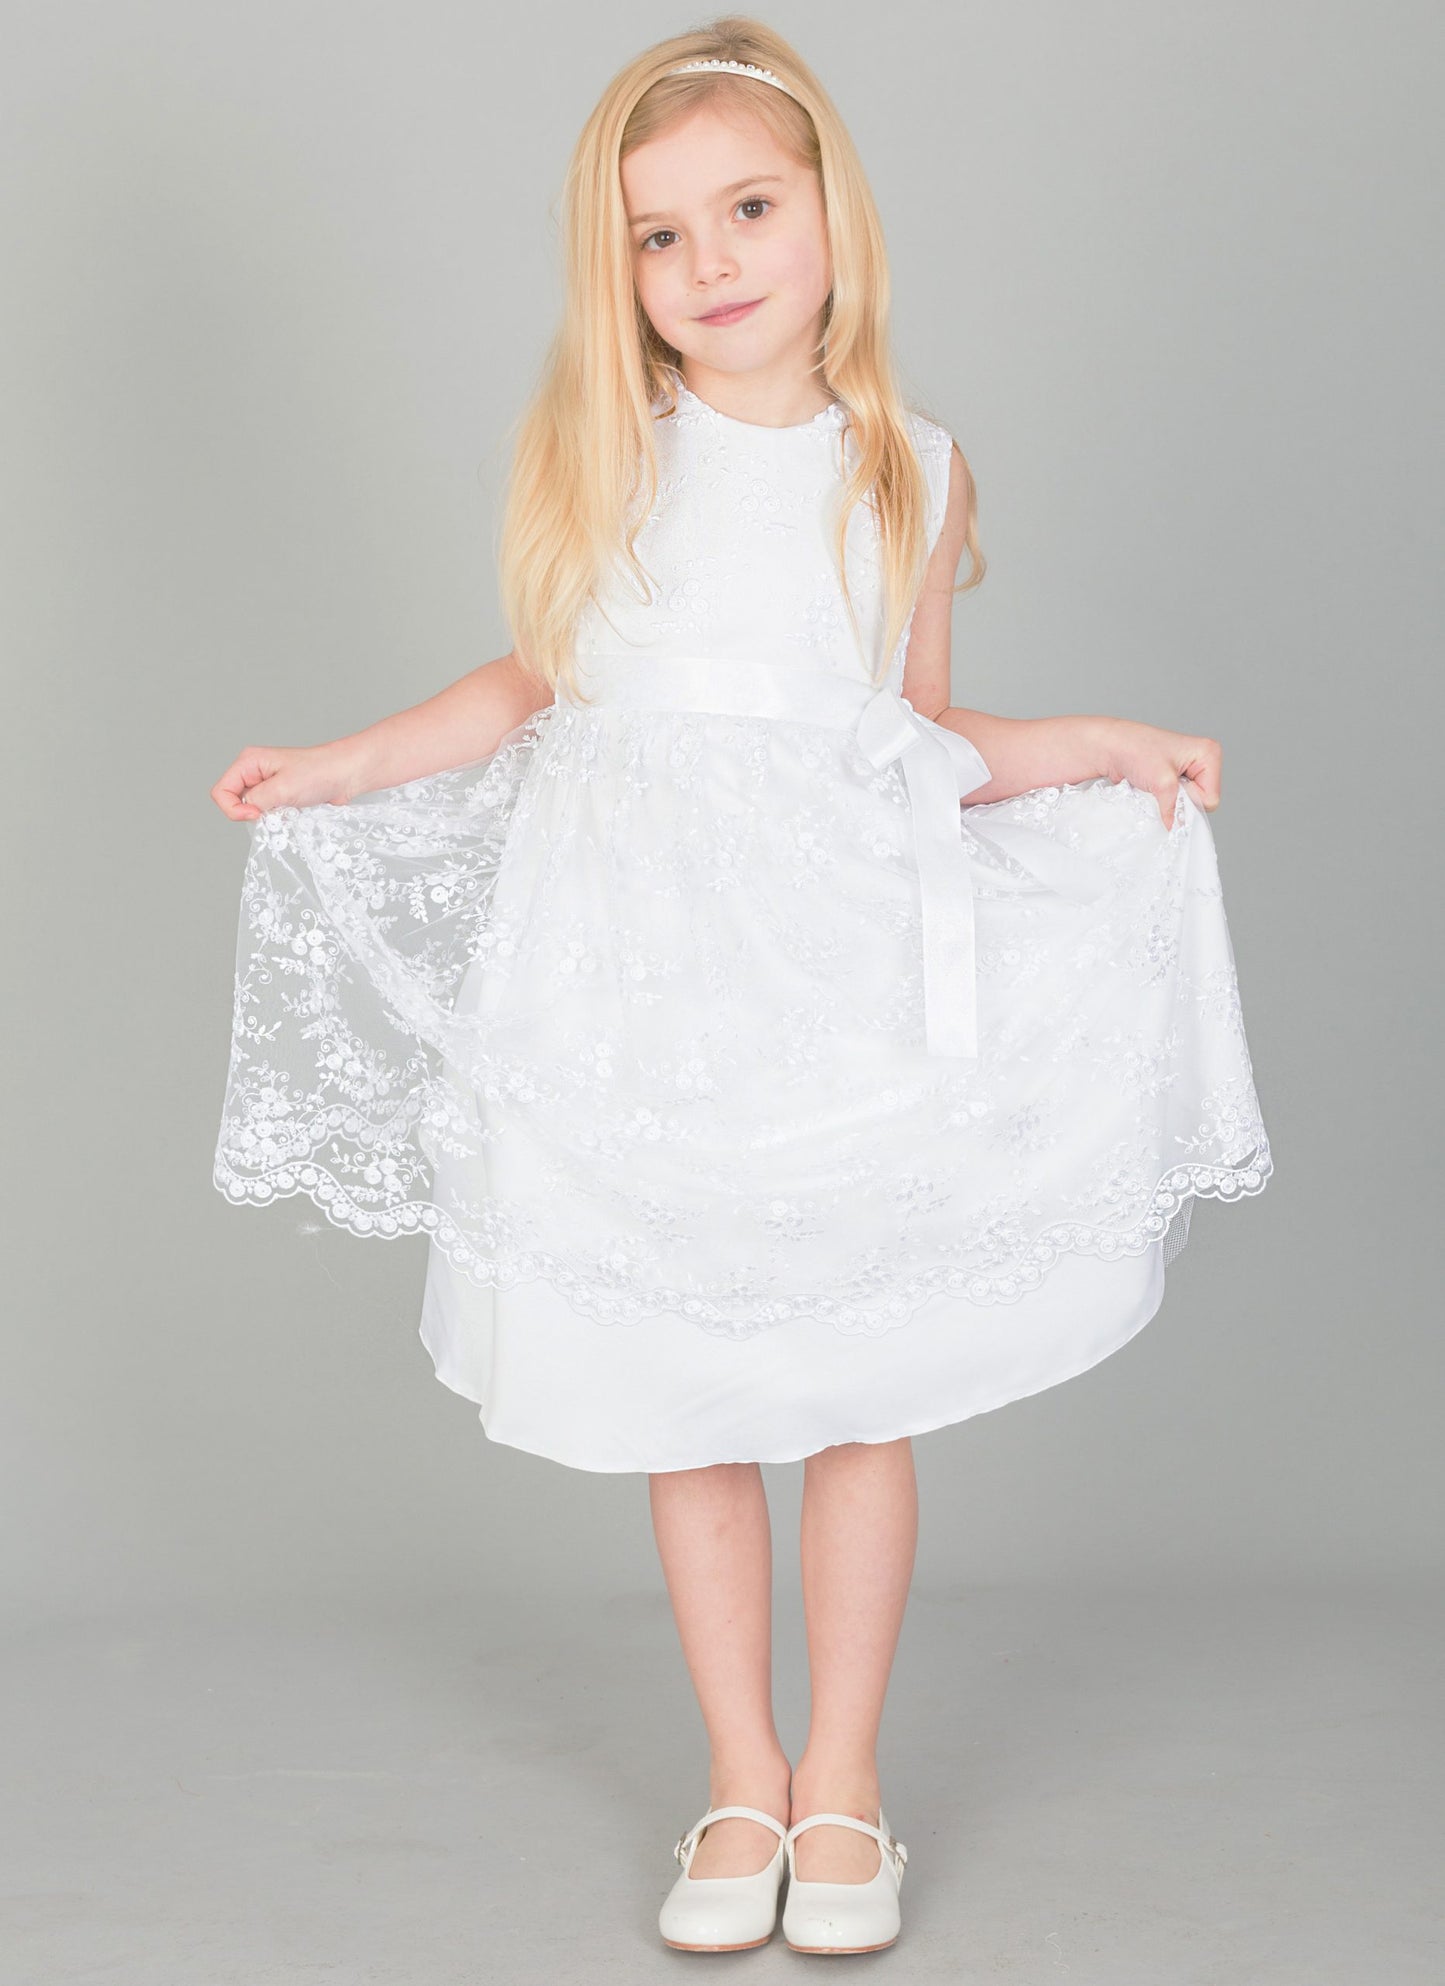 Girls Lace dress with Bow in IVORY or WHITE